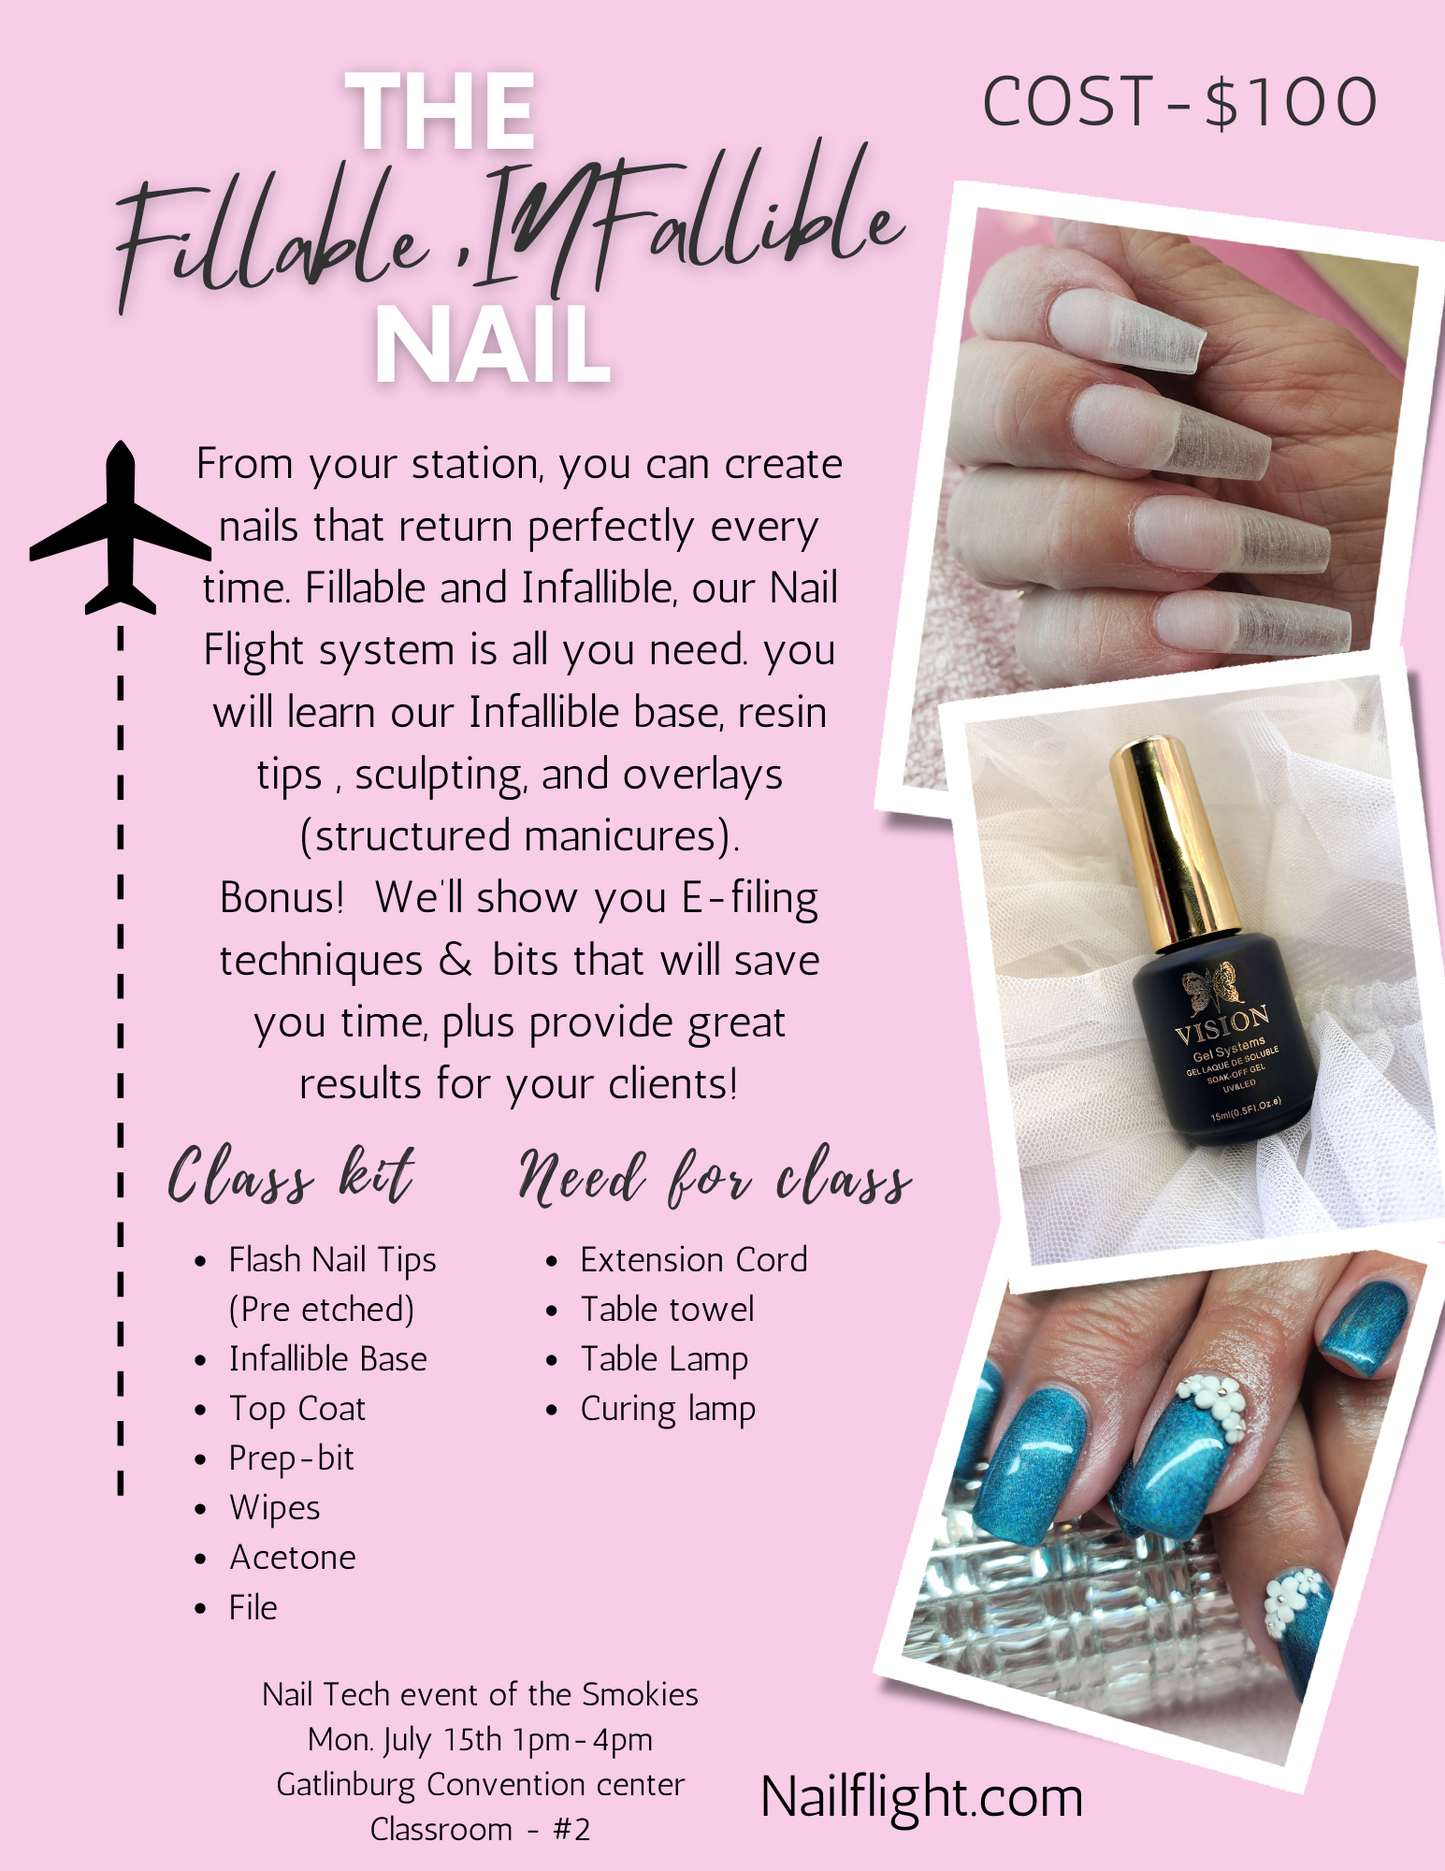 The fillable infallible nail